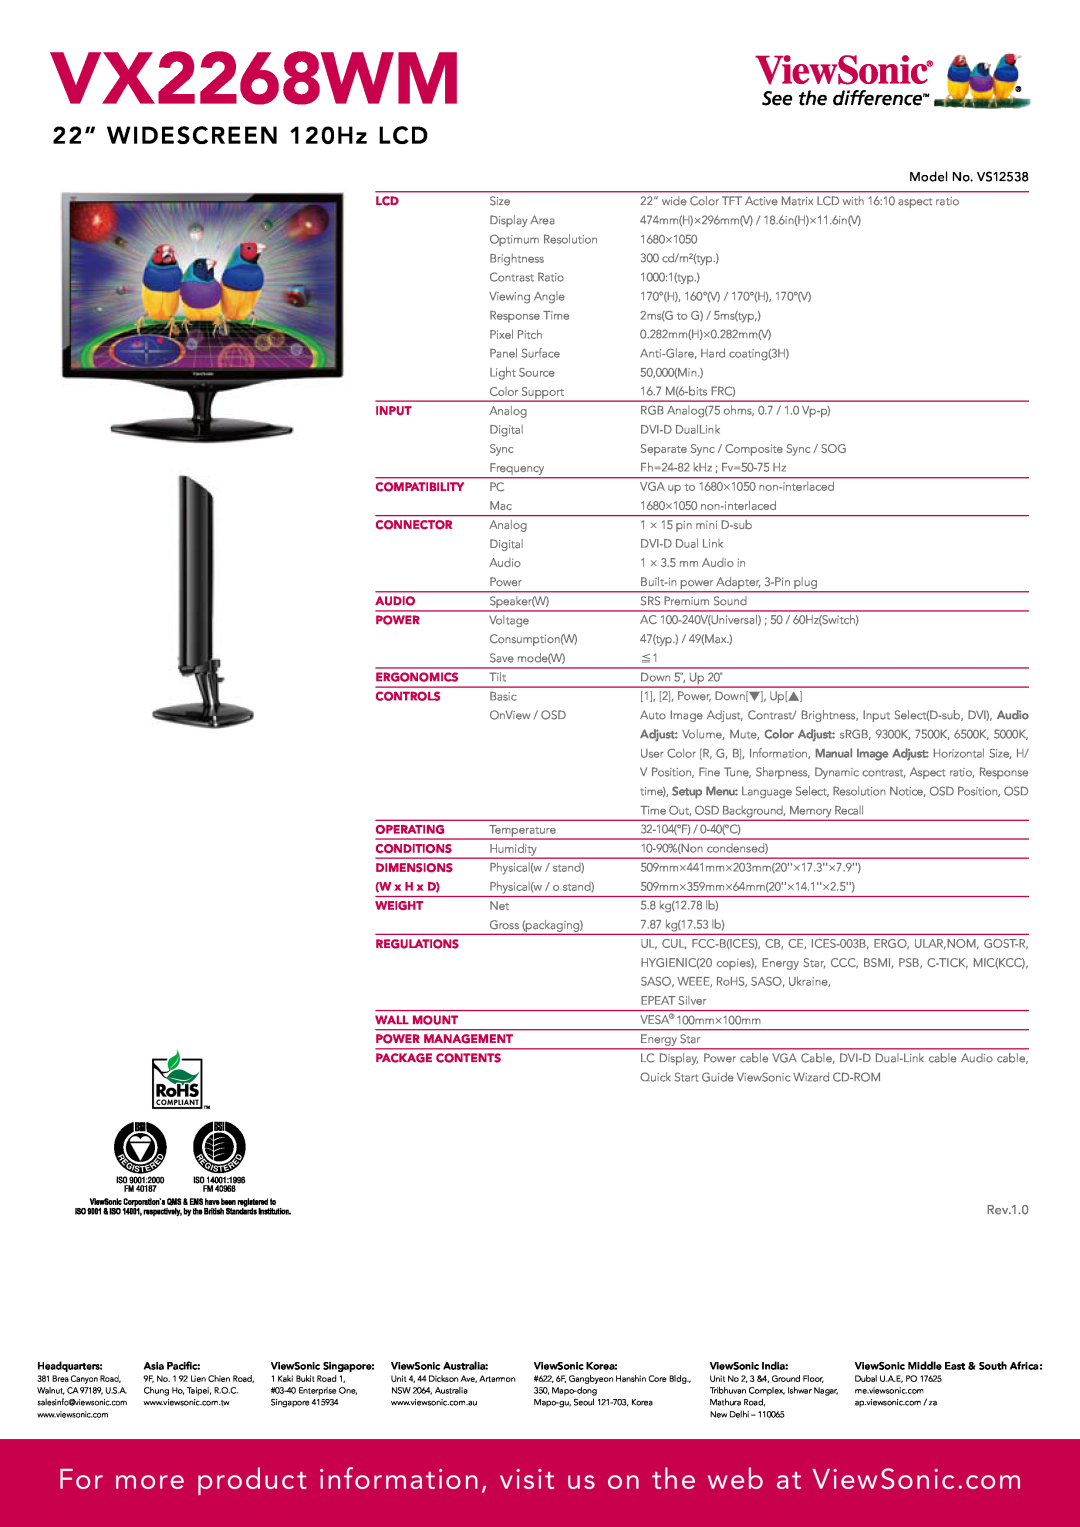 ViewSonic VX2268WM manual For more product information, visit us on the web at ViewSonic.com, 22” WIDESCREEN 120Hz LCD 